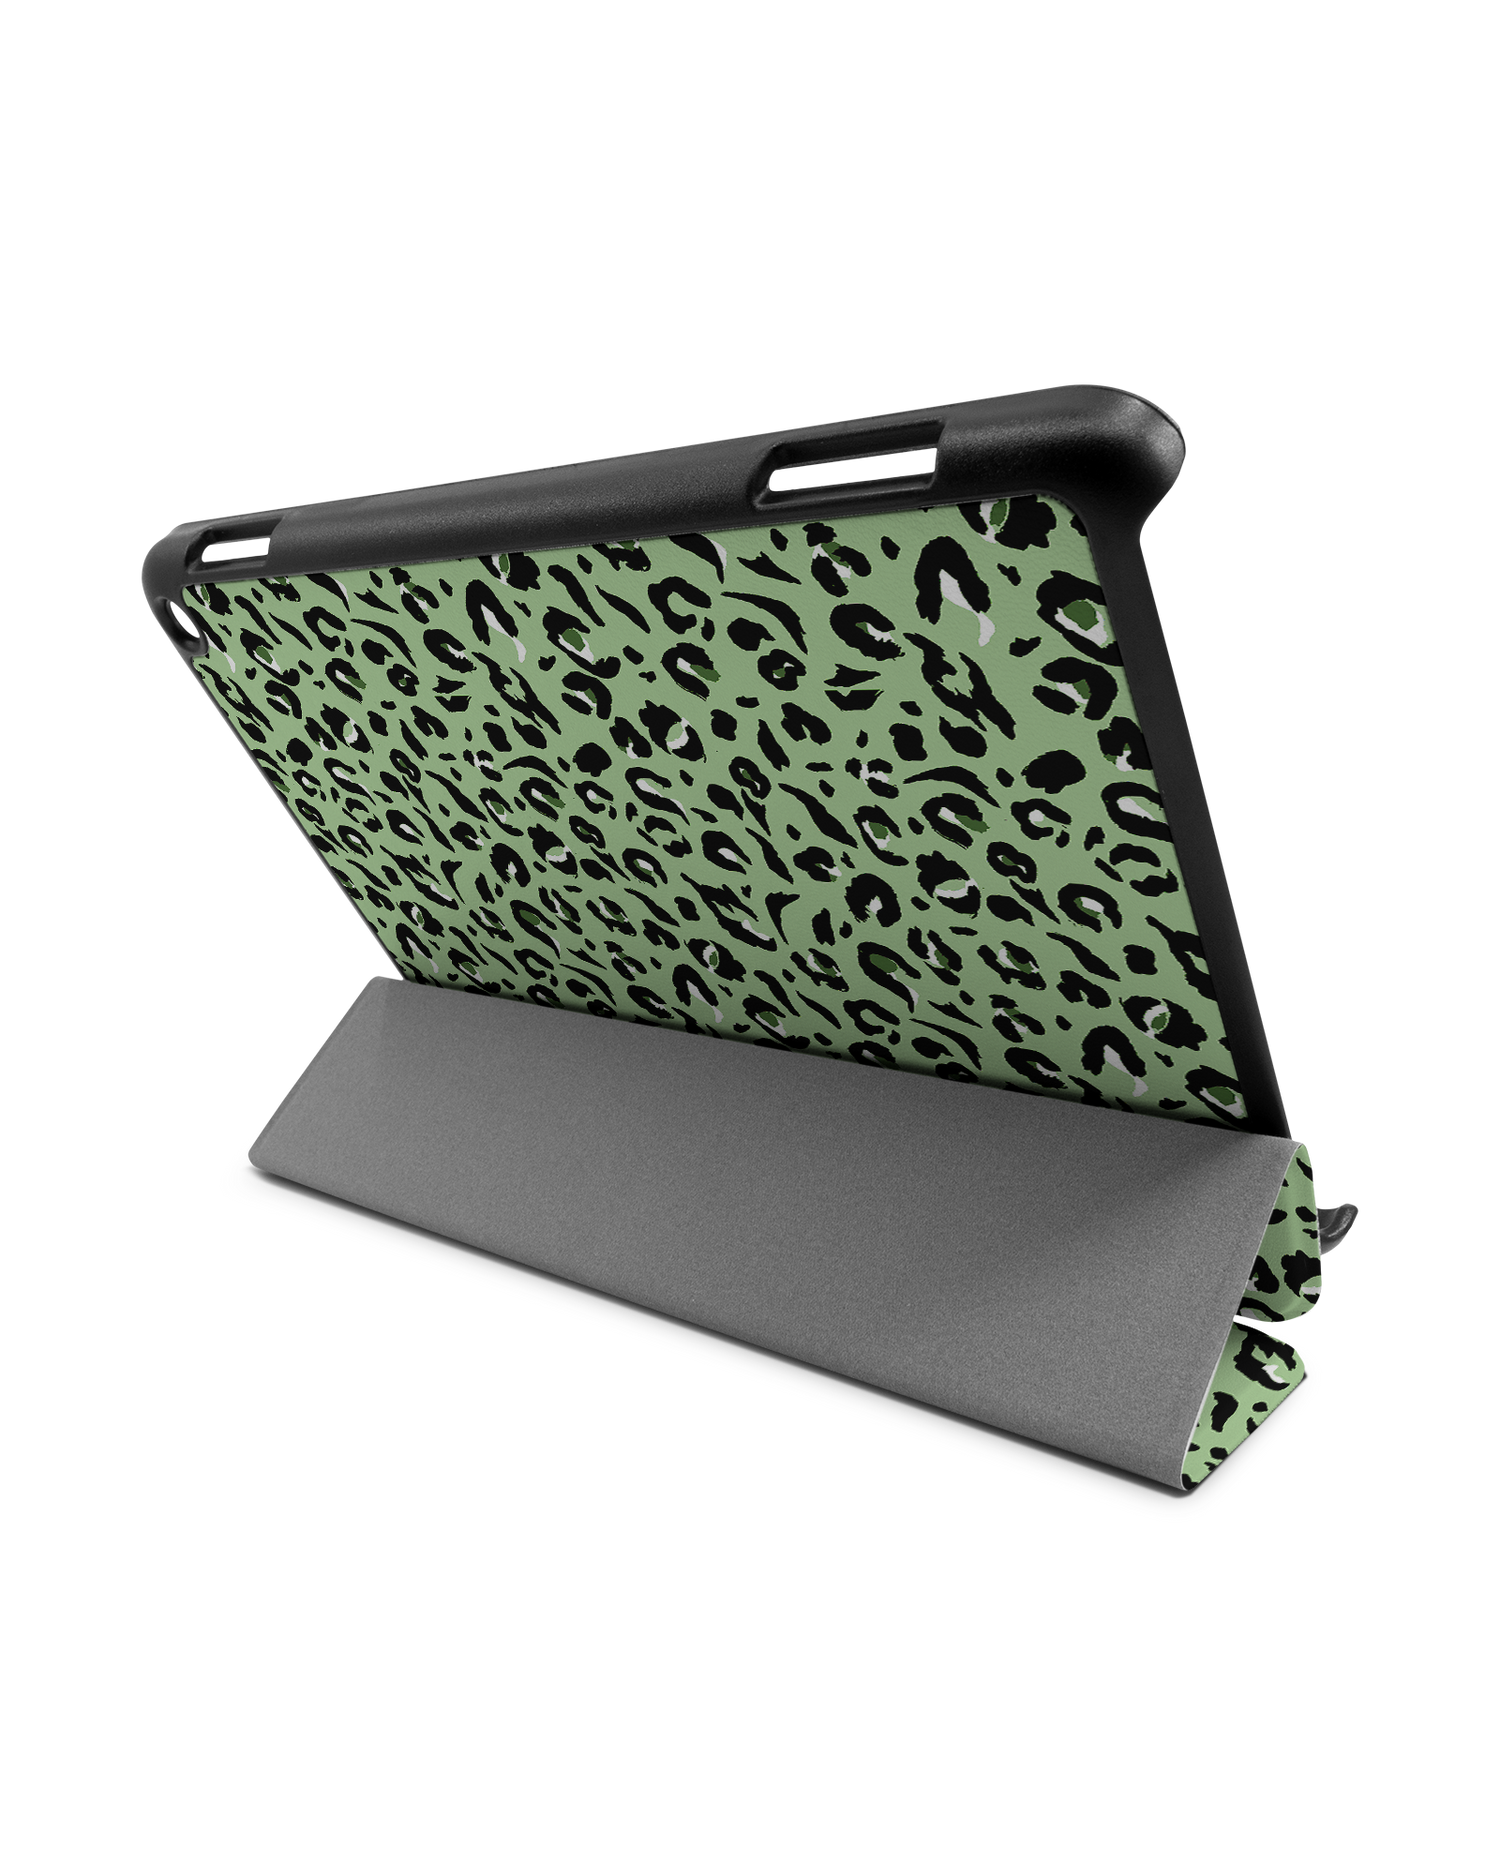 Mint Leopard Tablet Smart Case for Amazon Fire HD 8 (2022), Amazon Fire HD 8 Plus (2022), Amazon Fire HD 8 (2020), Amazon Fire HD 8 Plus (2020): Used as Stand